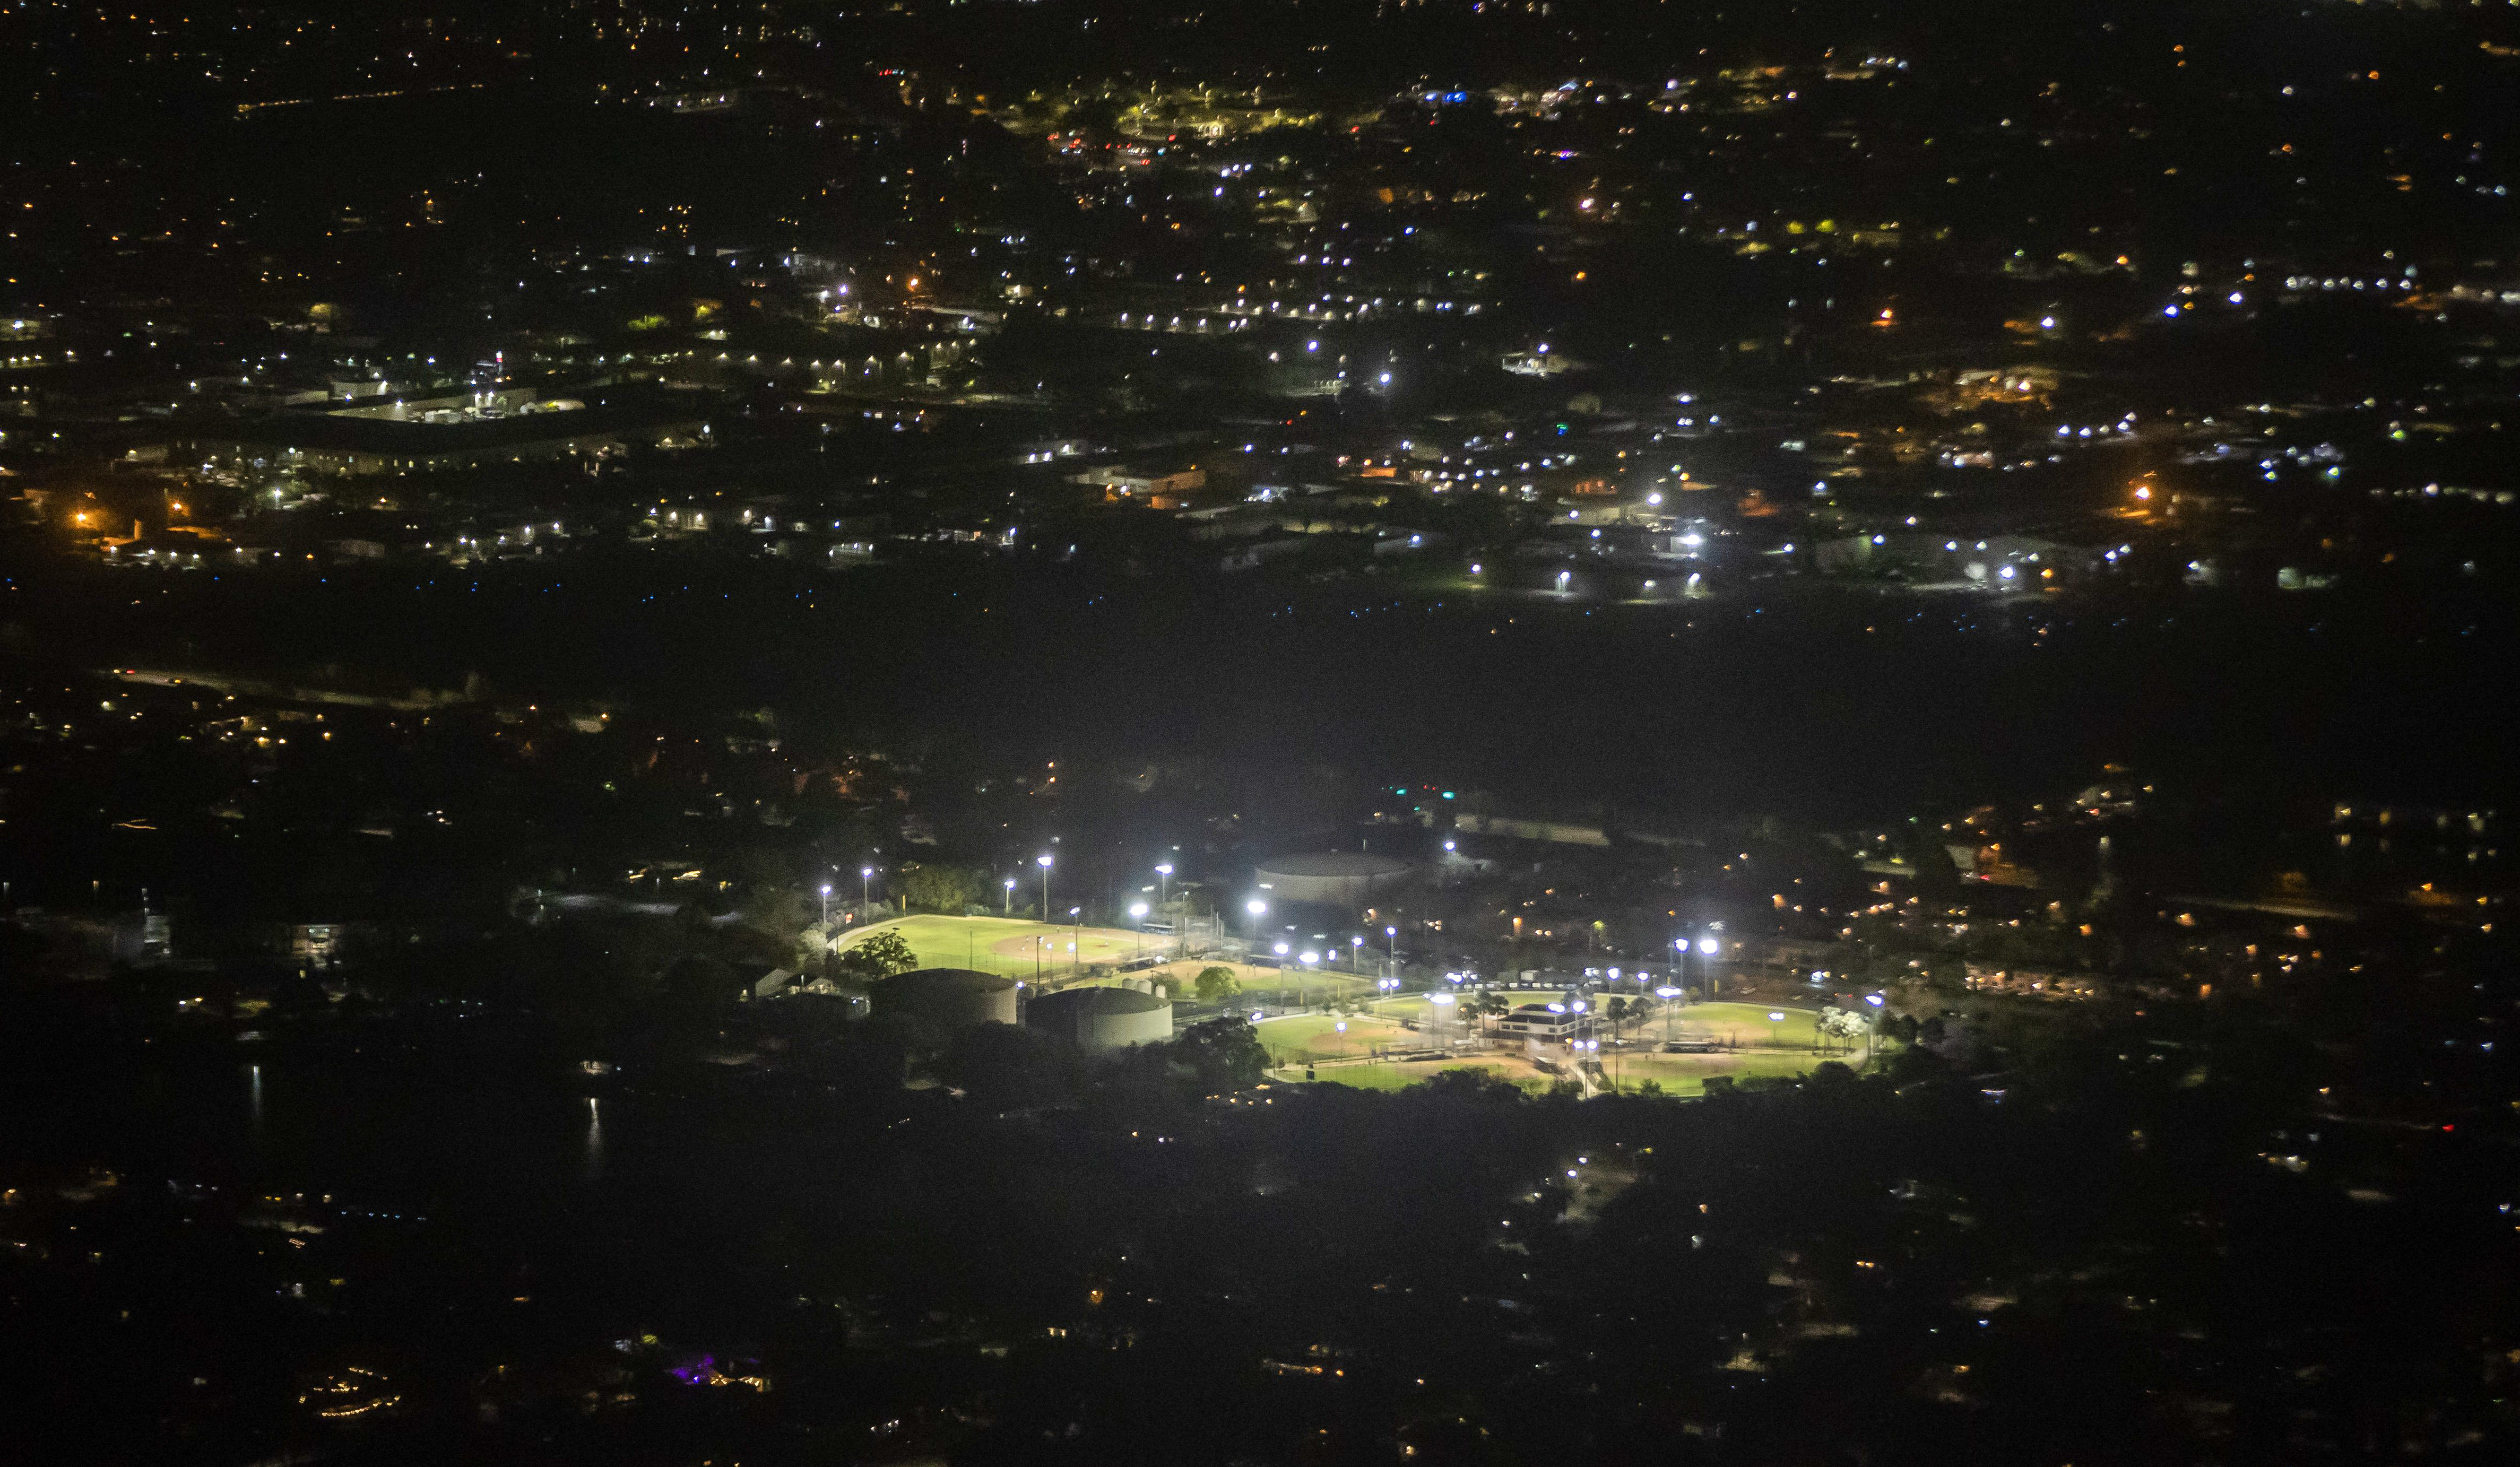 Flight instructor Ron Simonton said he often uses the lighted ballfields in the foreground as a marker when trying to find Clearwater Airpark at night. Just beyond the fields, a dark portion of land is seen where the airpark is located with its runway lights switched off on Thursday.